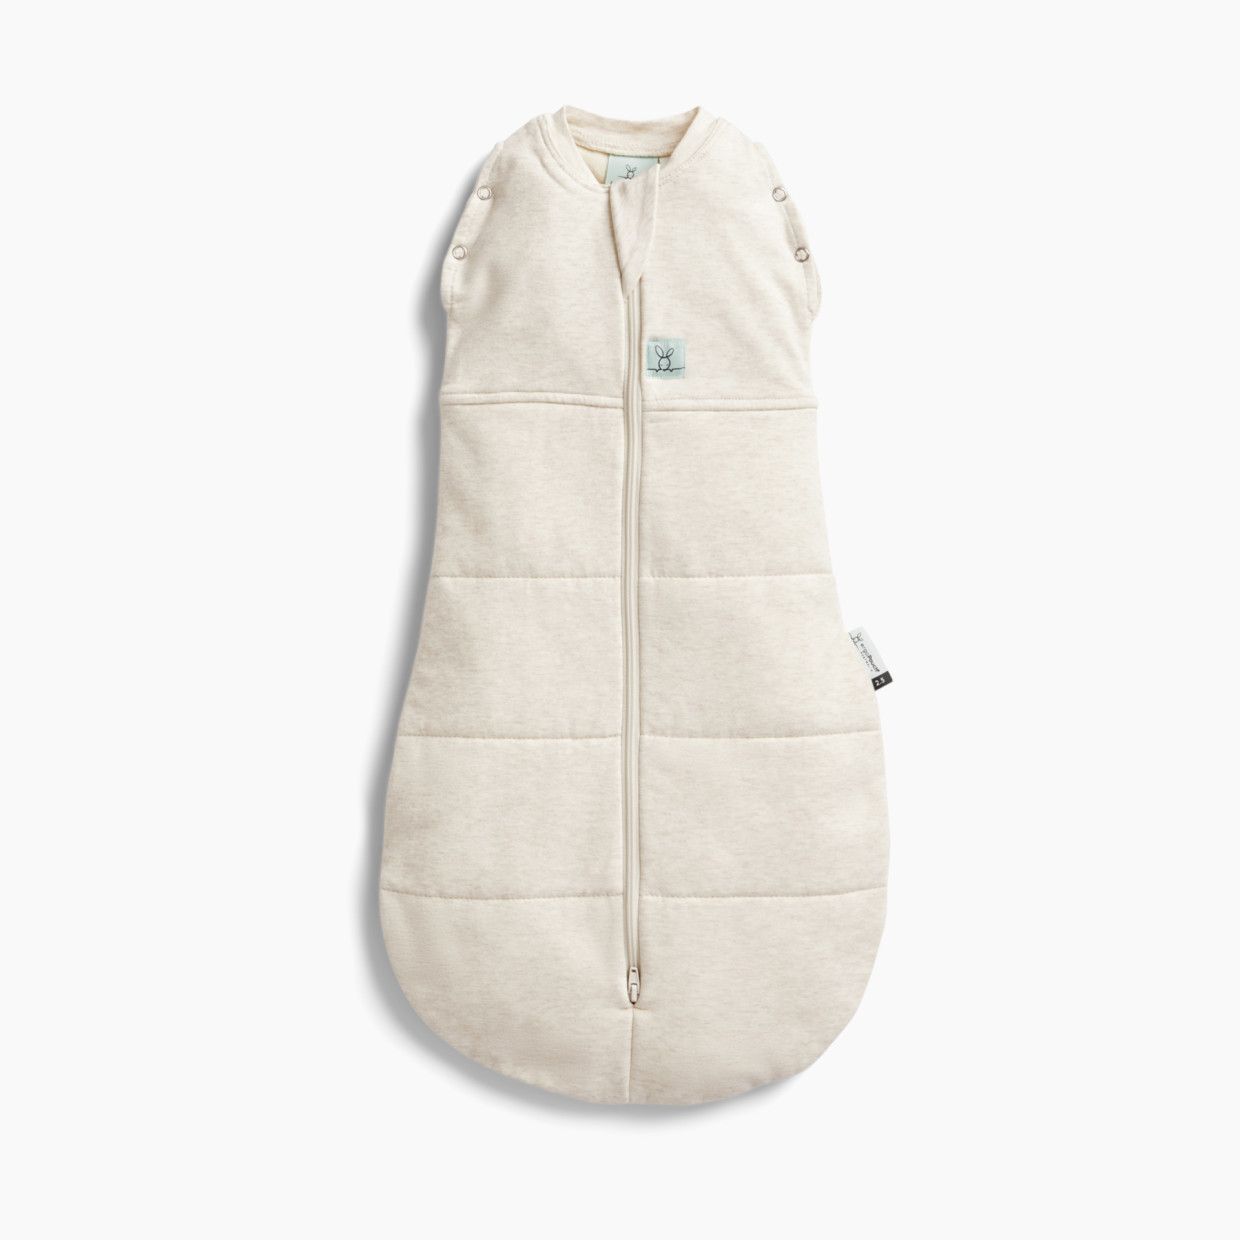 ergoPouch Cocoon Swaddle Sack 2.5 Tog - Oatmeal Marle, 0-3 Months.